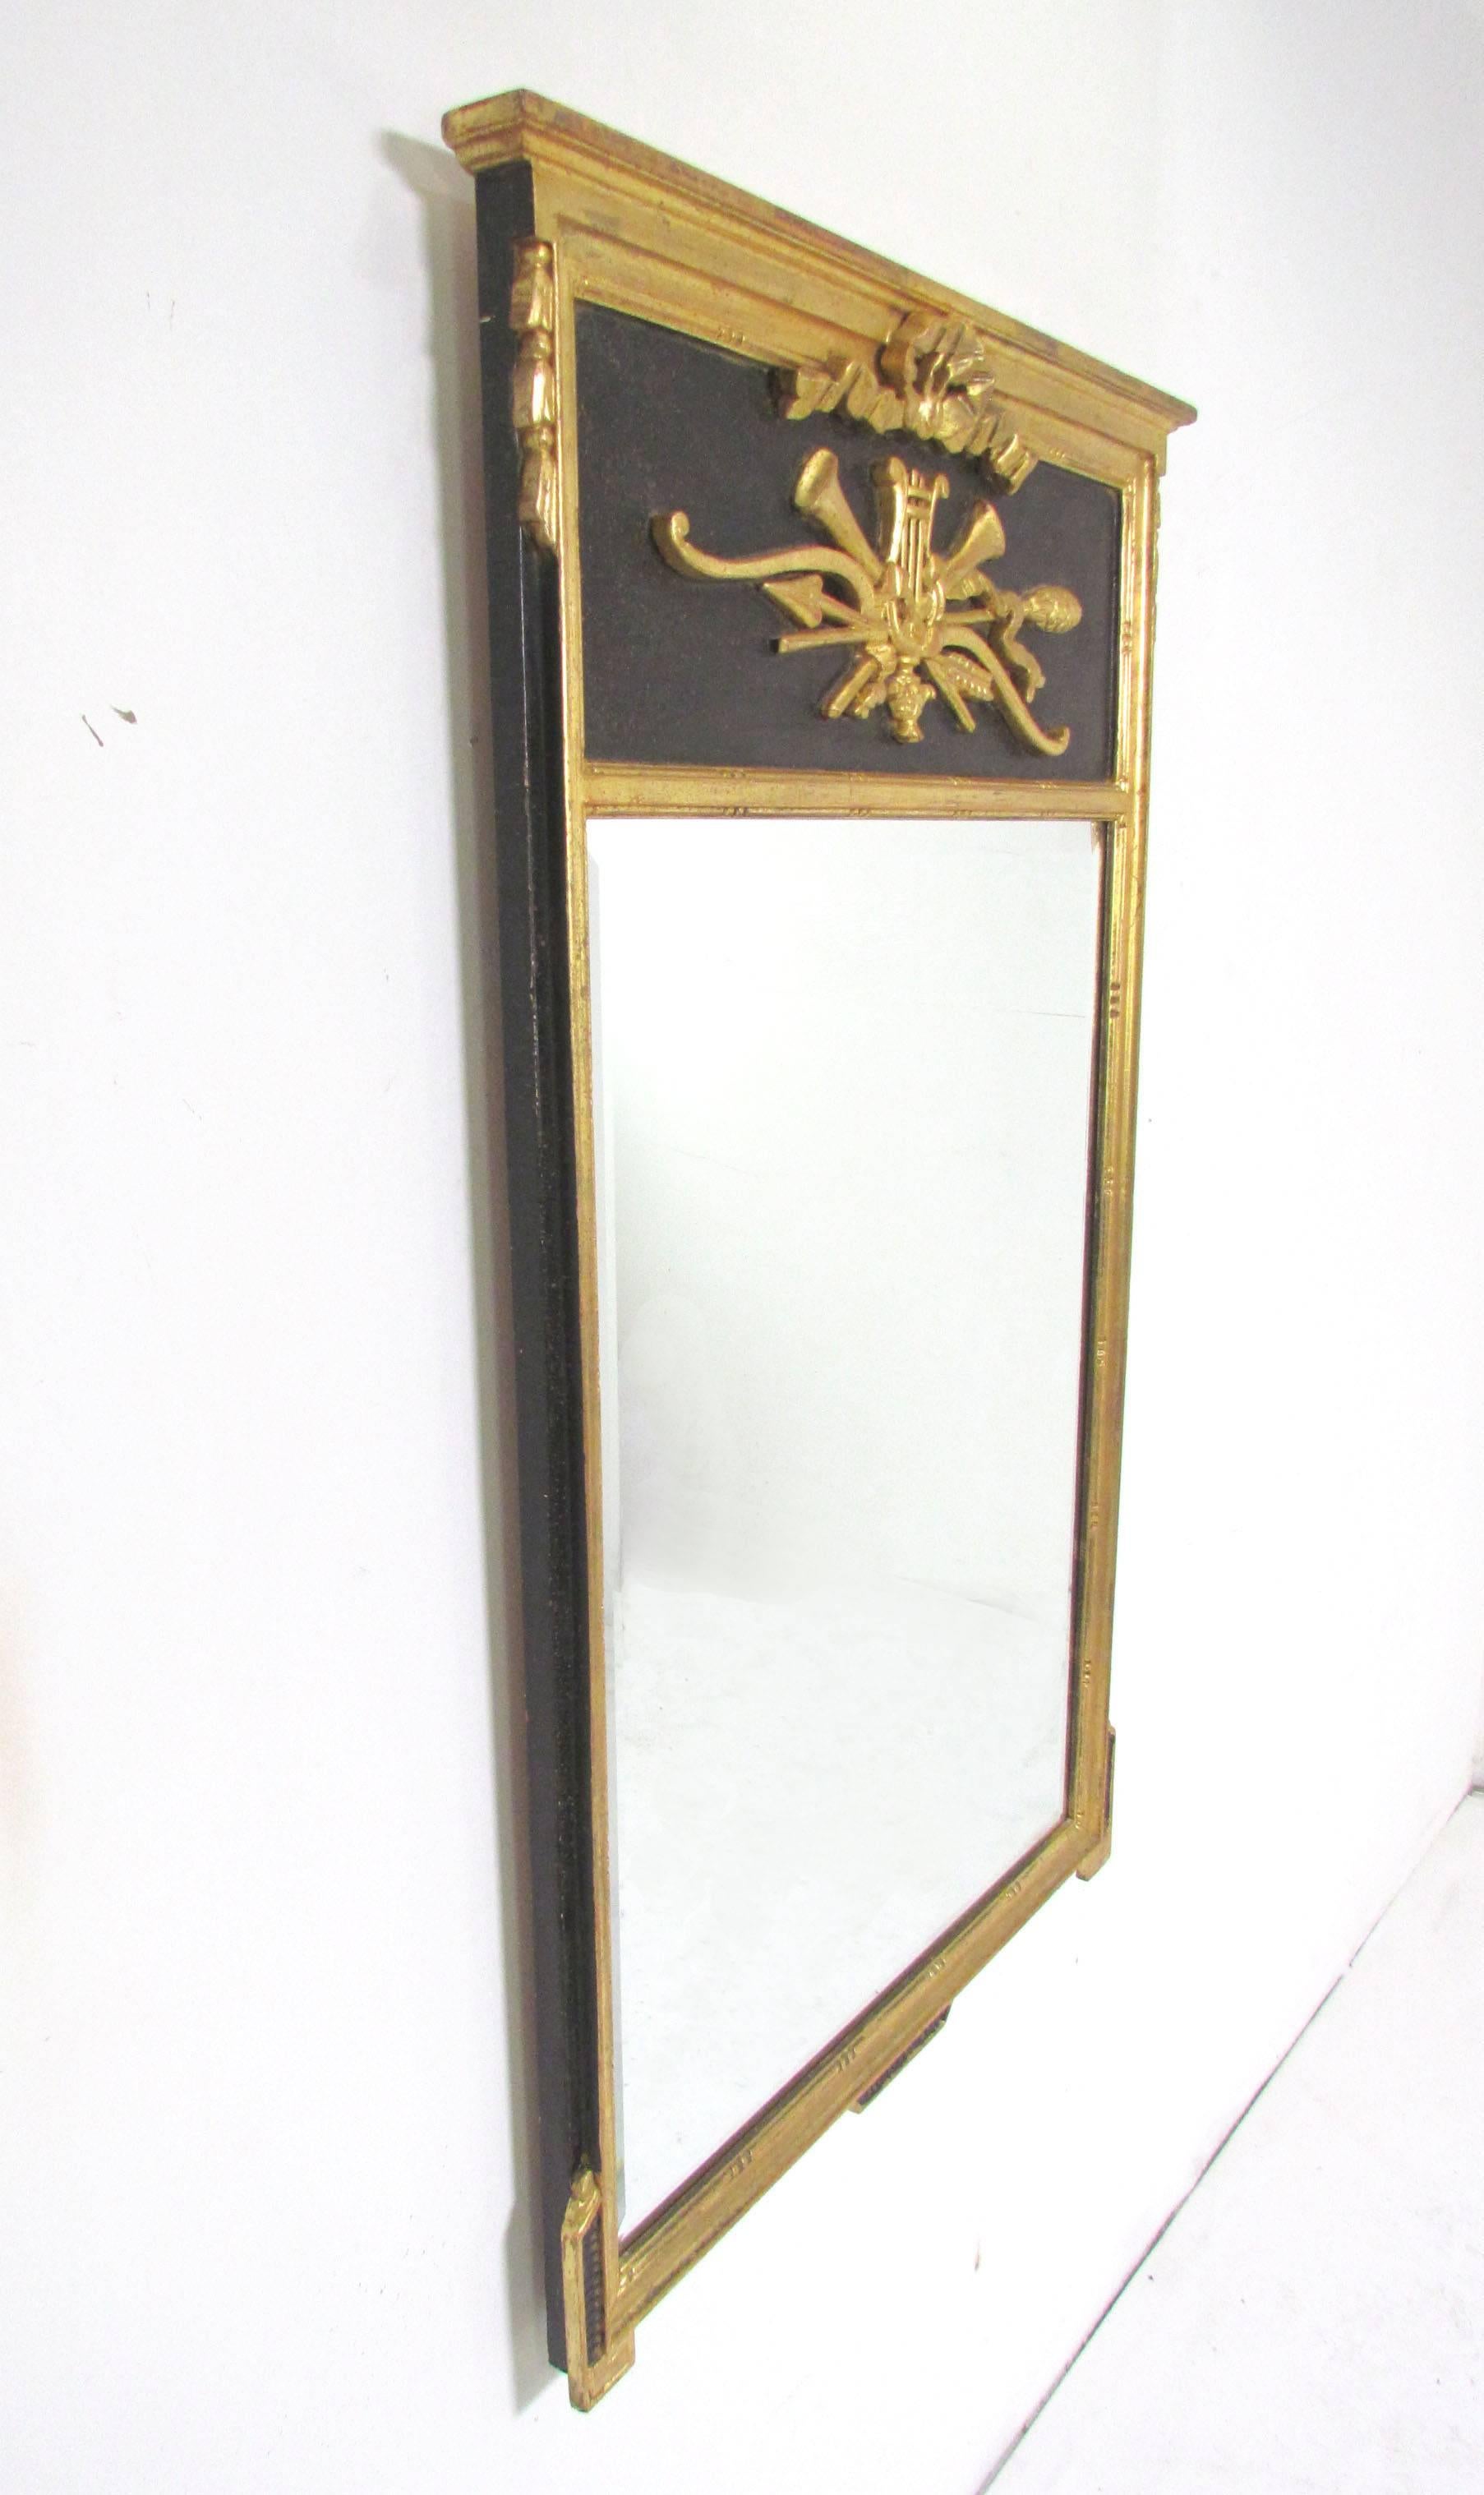 Elegant neoclassical style giltwood wall or mantel mirror with beveled glass, marked 